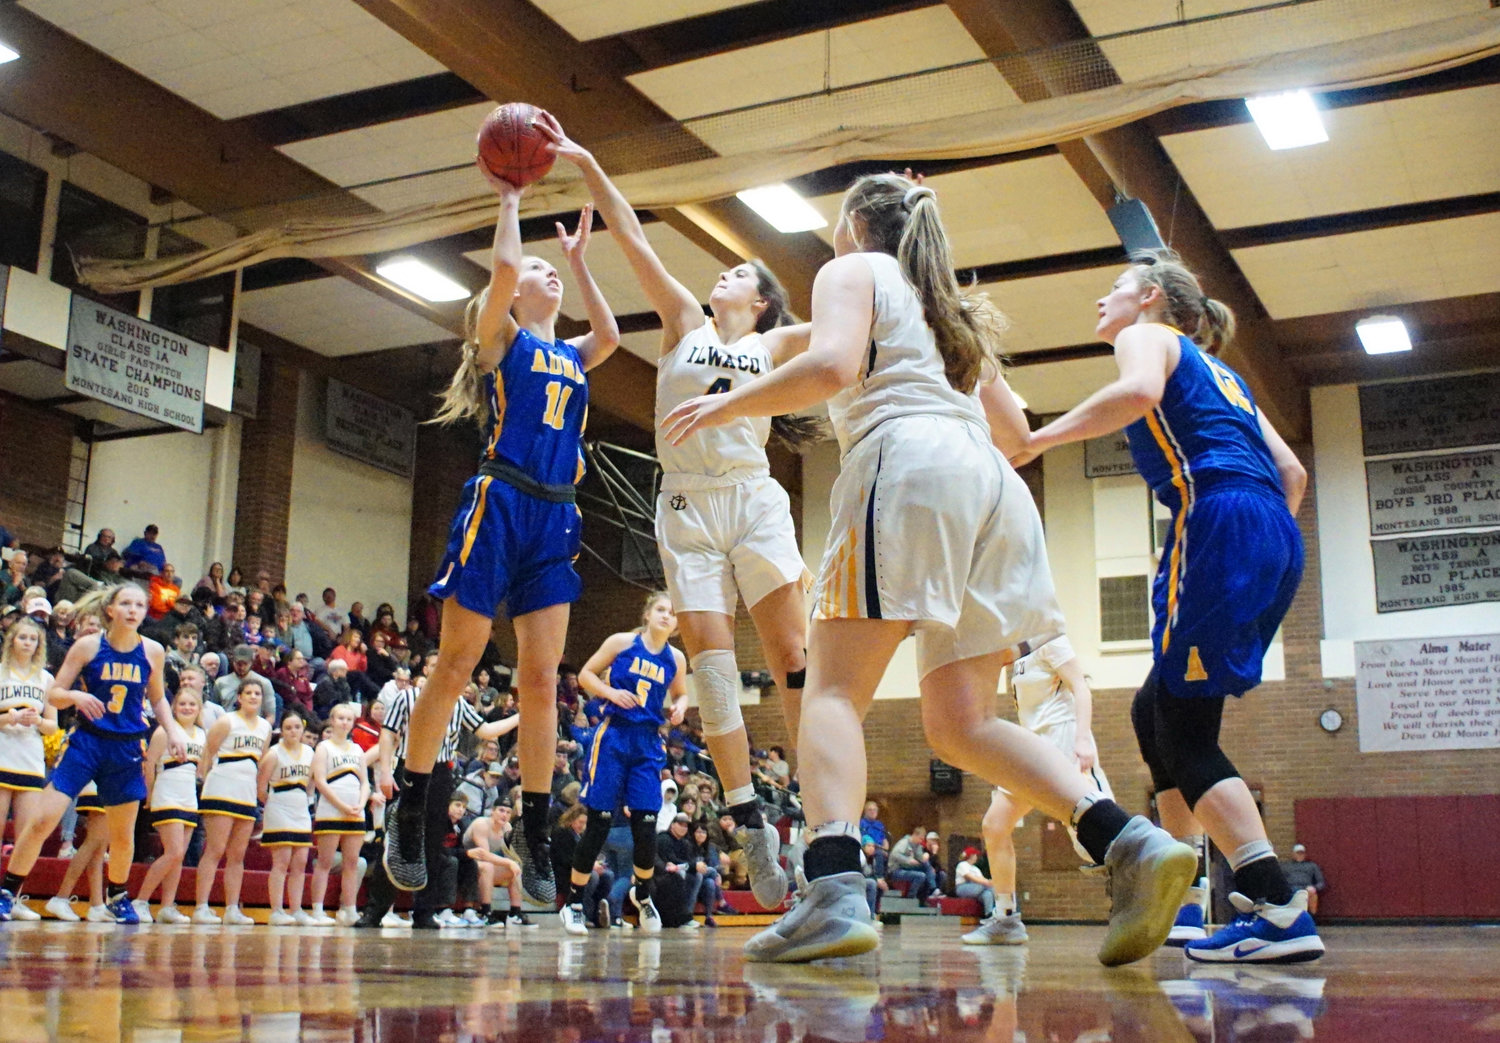 Adna's Faith Wellanger gets blocked by an Ilwaco defender during the Pirates' 42-26 loss to the Fishermen on Saturday. (Rob Hilson / For The Chronicle)